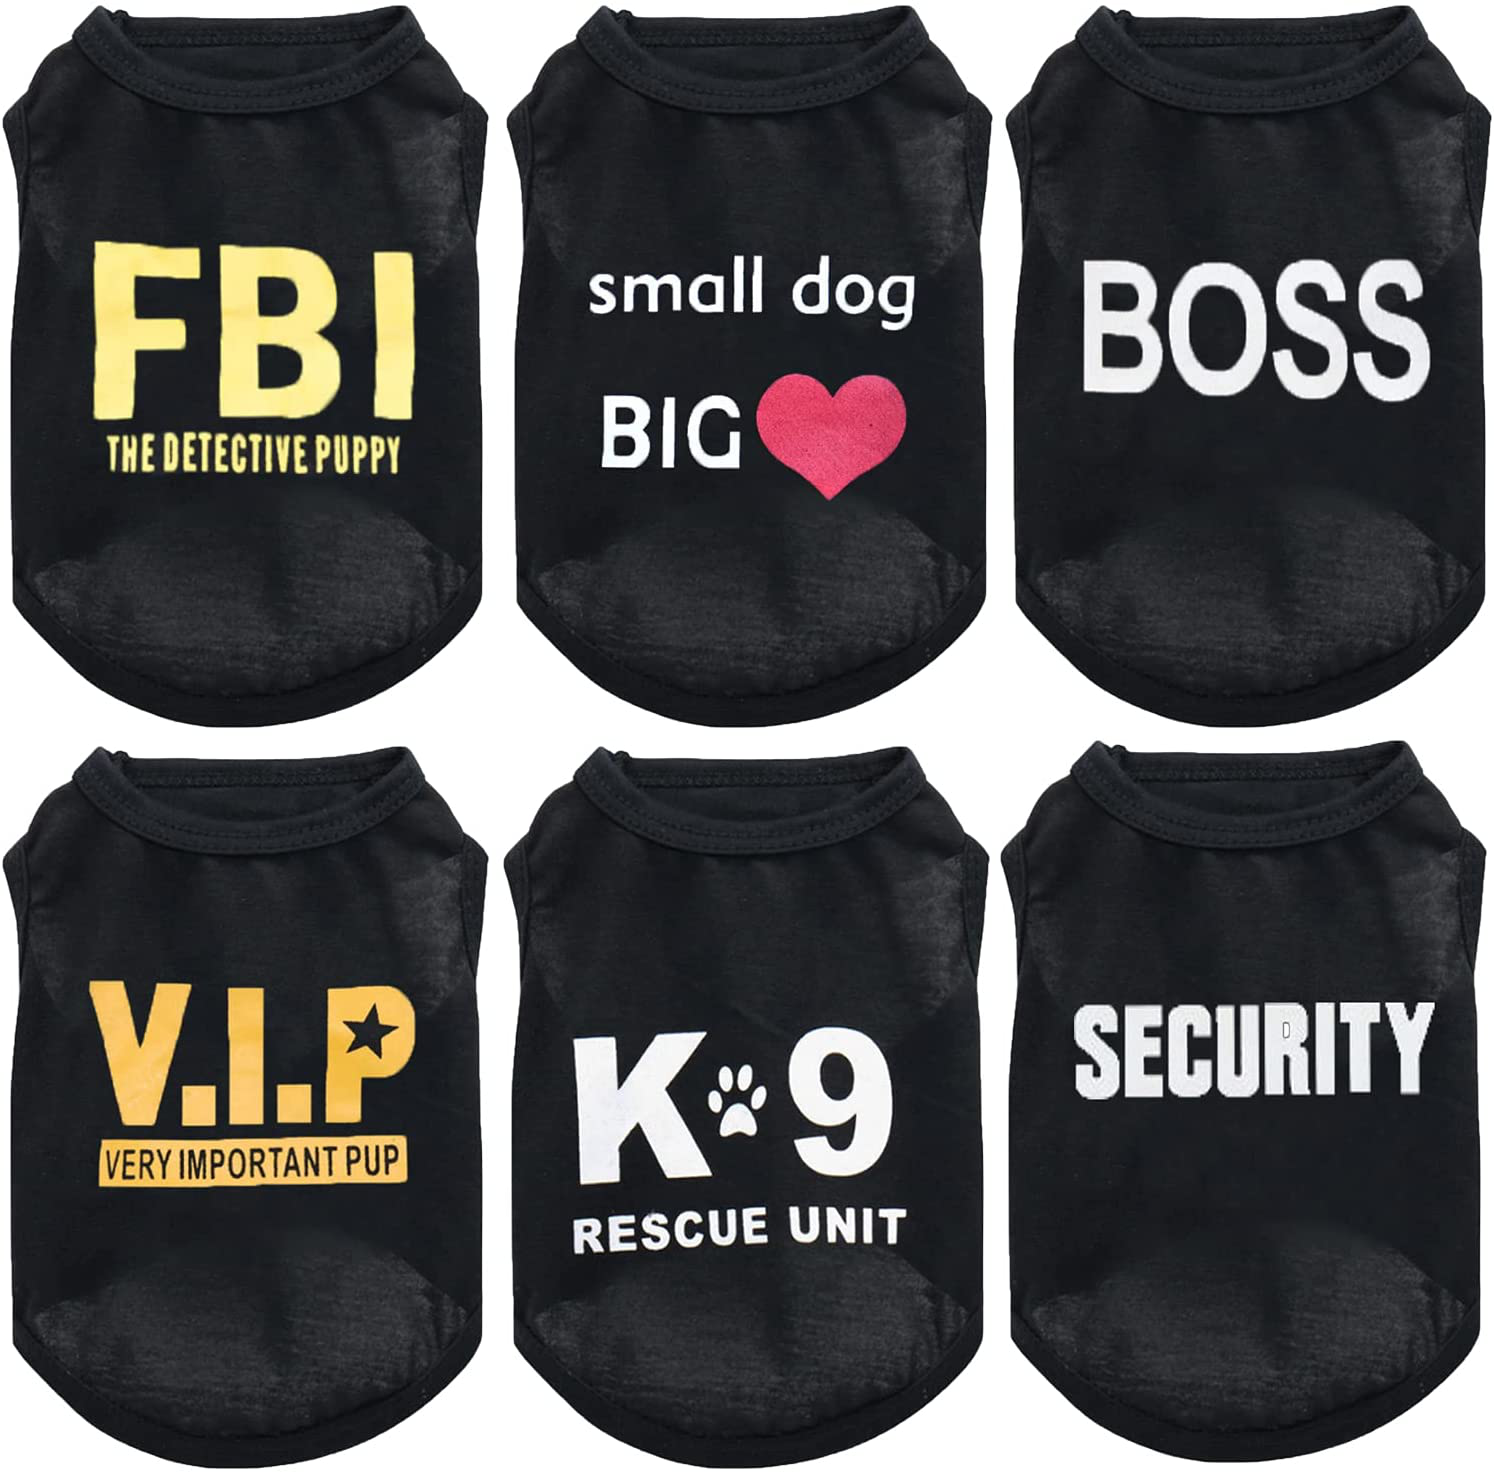 Puppy Clothes for Small Dog Boy Summer Shirt for Chihuahua Yorkies Male Pet Outfits Cat Clothing Black Vest Funny Apparel ……